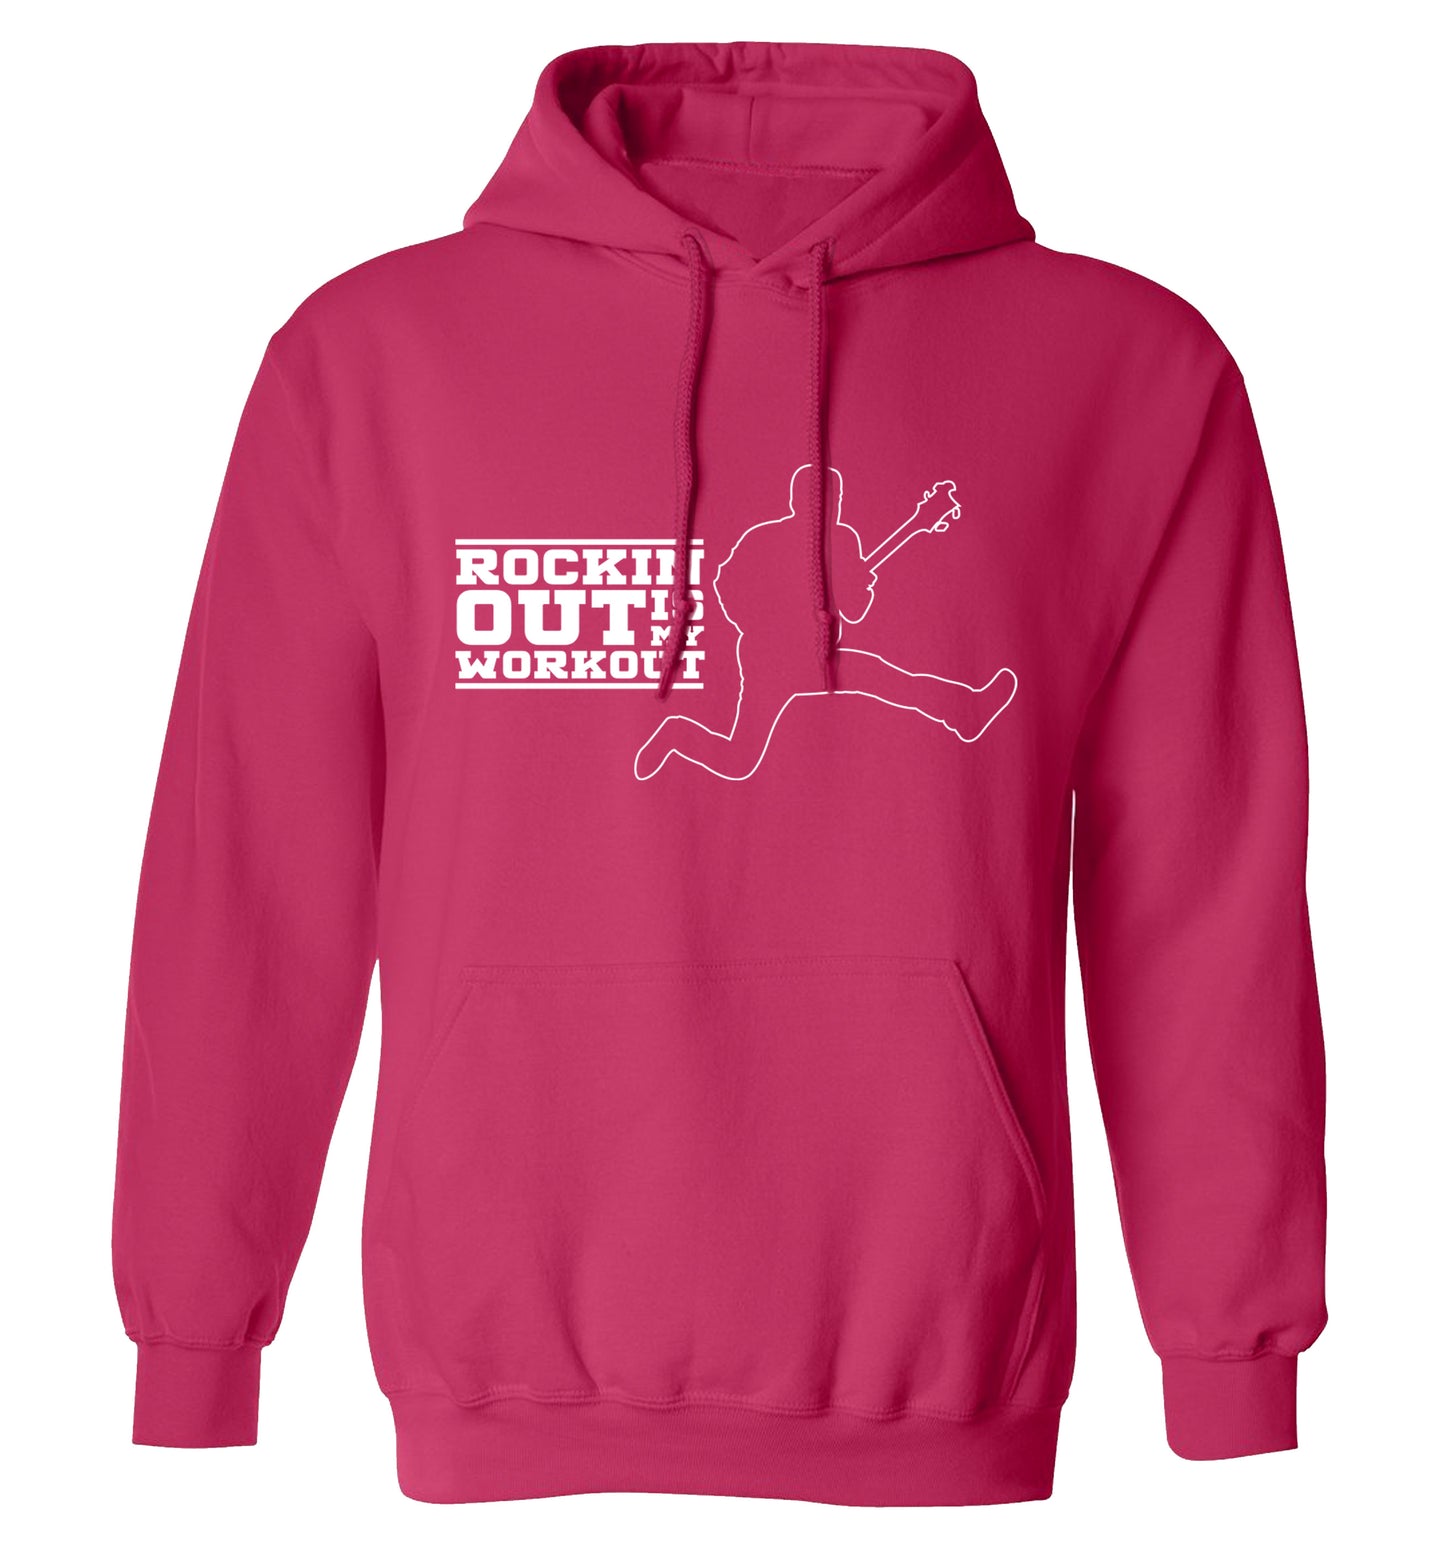 Rockin out is my workout adults unisex pink hoodie 2XL